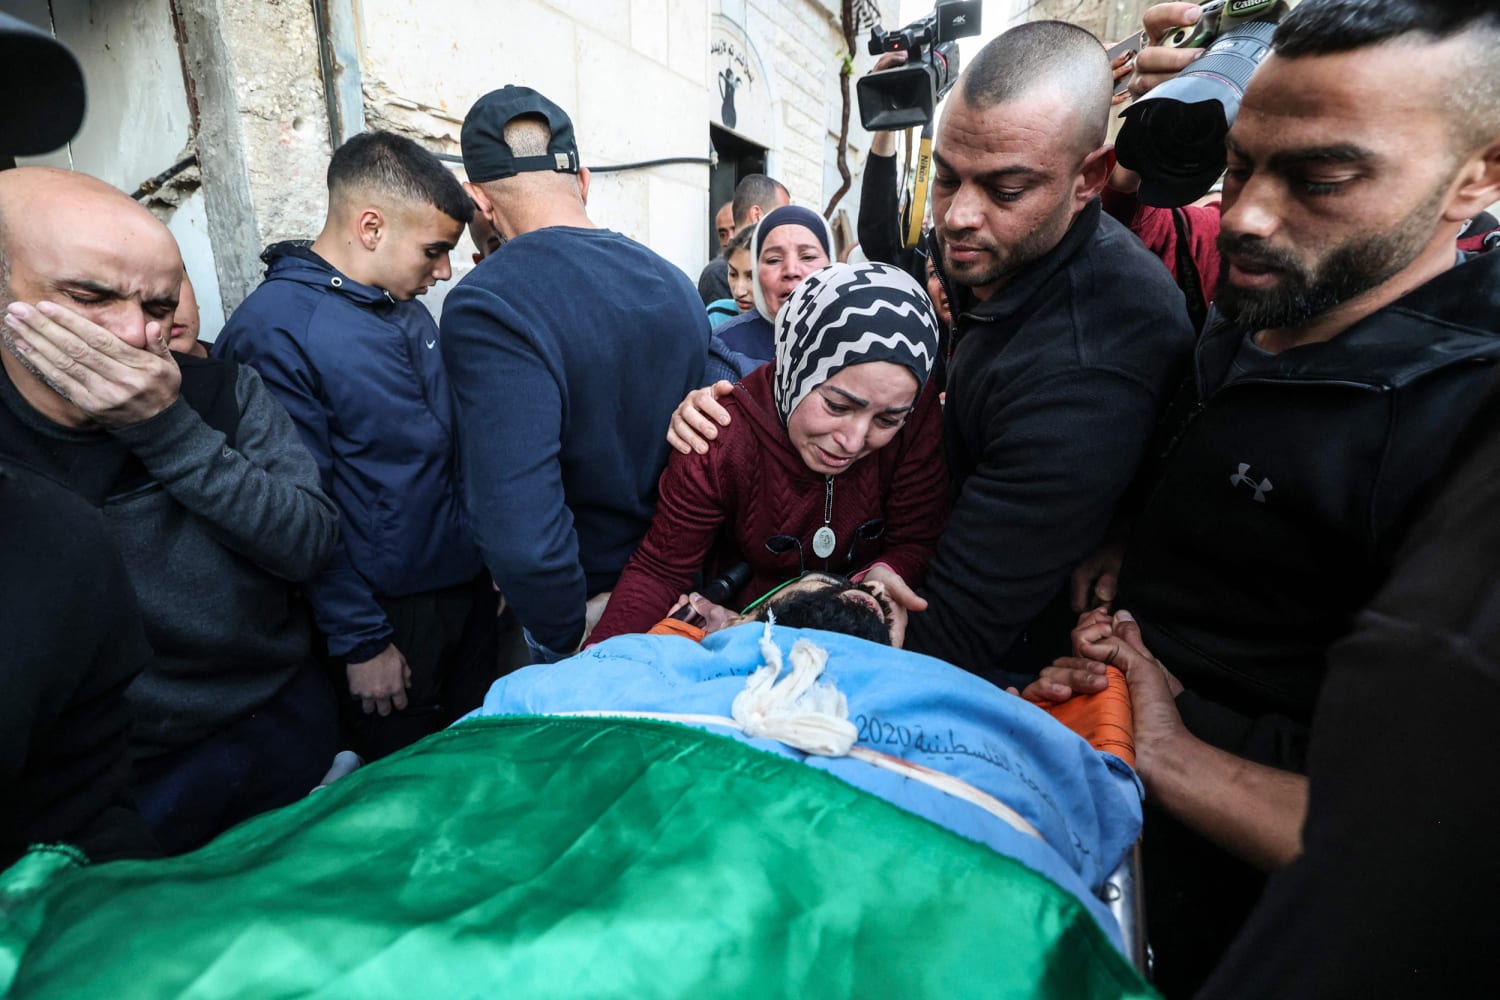 Gallup finds more Democrats  have sympathy for Palestinians than Israelis